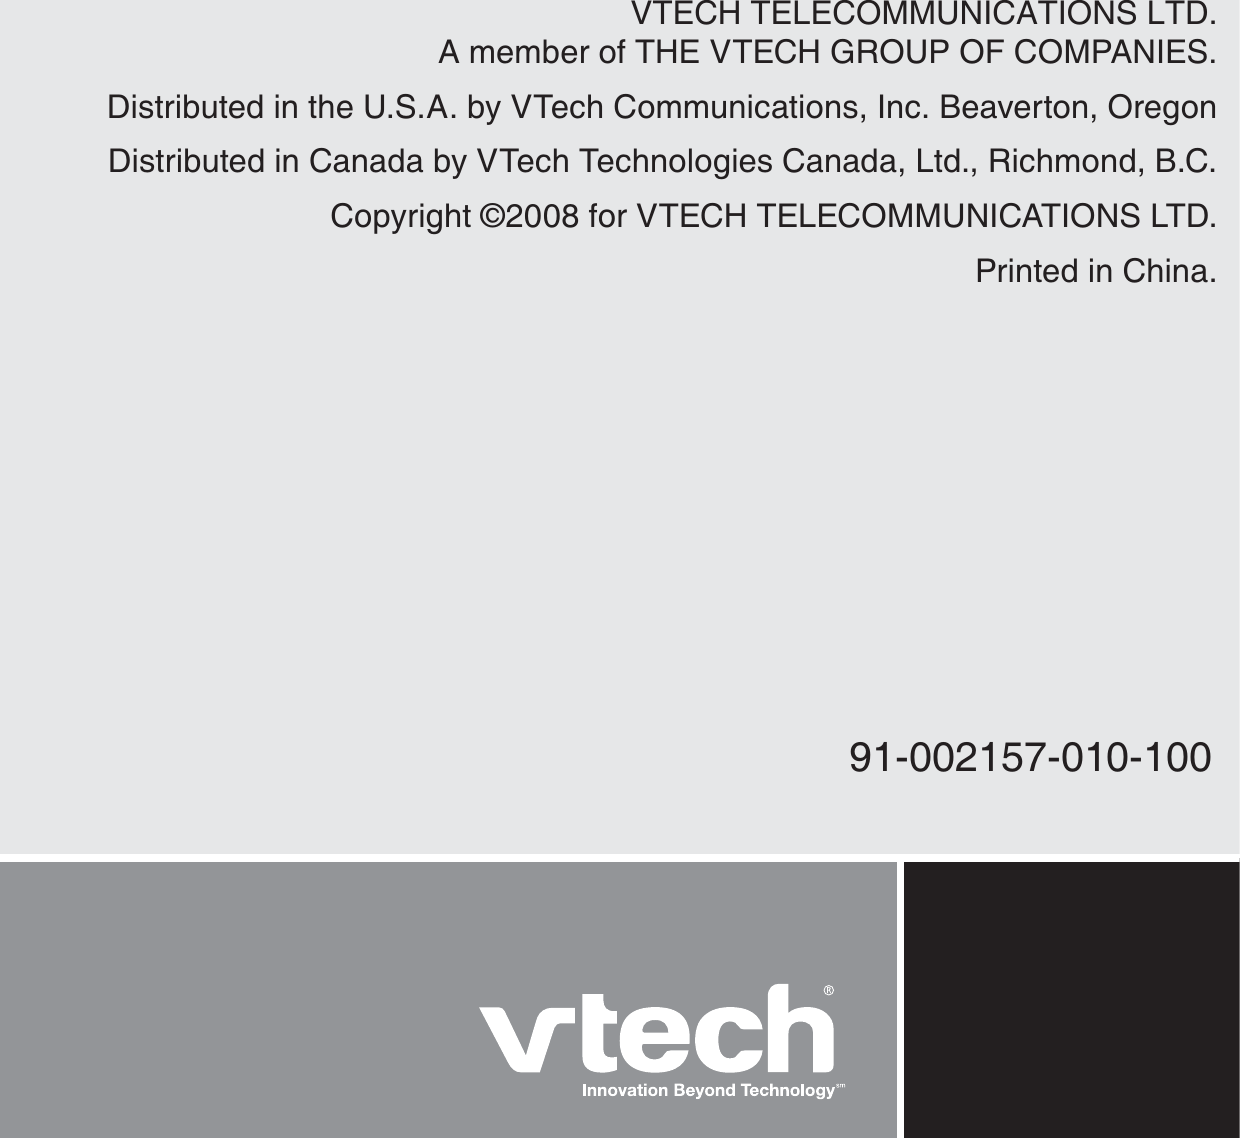 VTECH TELECOMMUNICATIONS LTD.A member of THE VTECH GROUP OF COMPANIES.Distributed in the U.S.A. by VTech Communications, Inc. Beaverton, OregonDistributed in Canada by VTech Technologies Canada, Ltd., Richmond, B.C.Copyright ©2008 for VTECH TELECOMMUNICATIONS LTD.Printed in China.91-002157-010-100